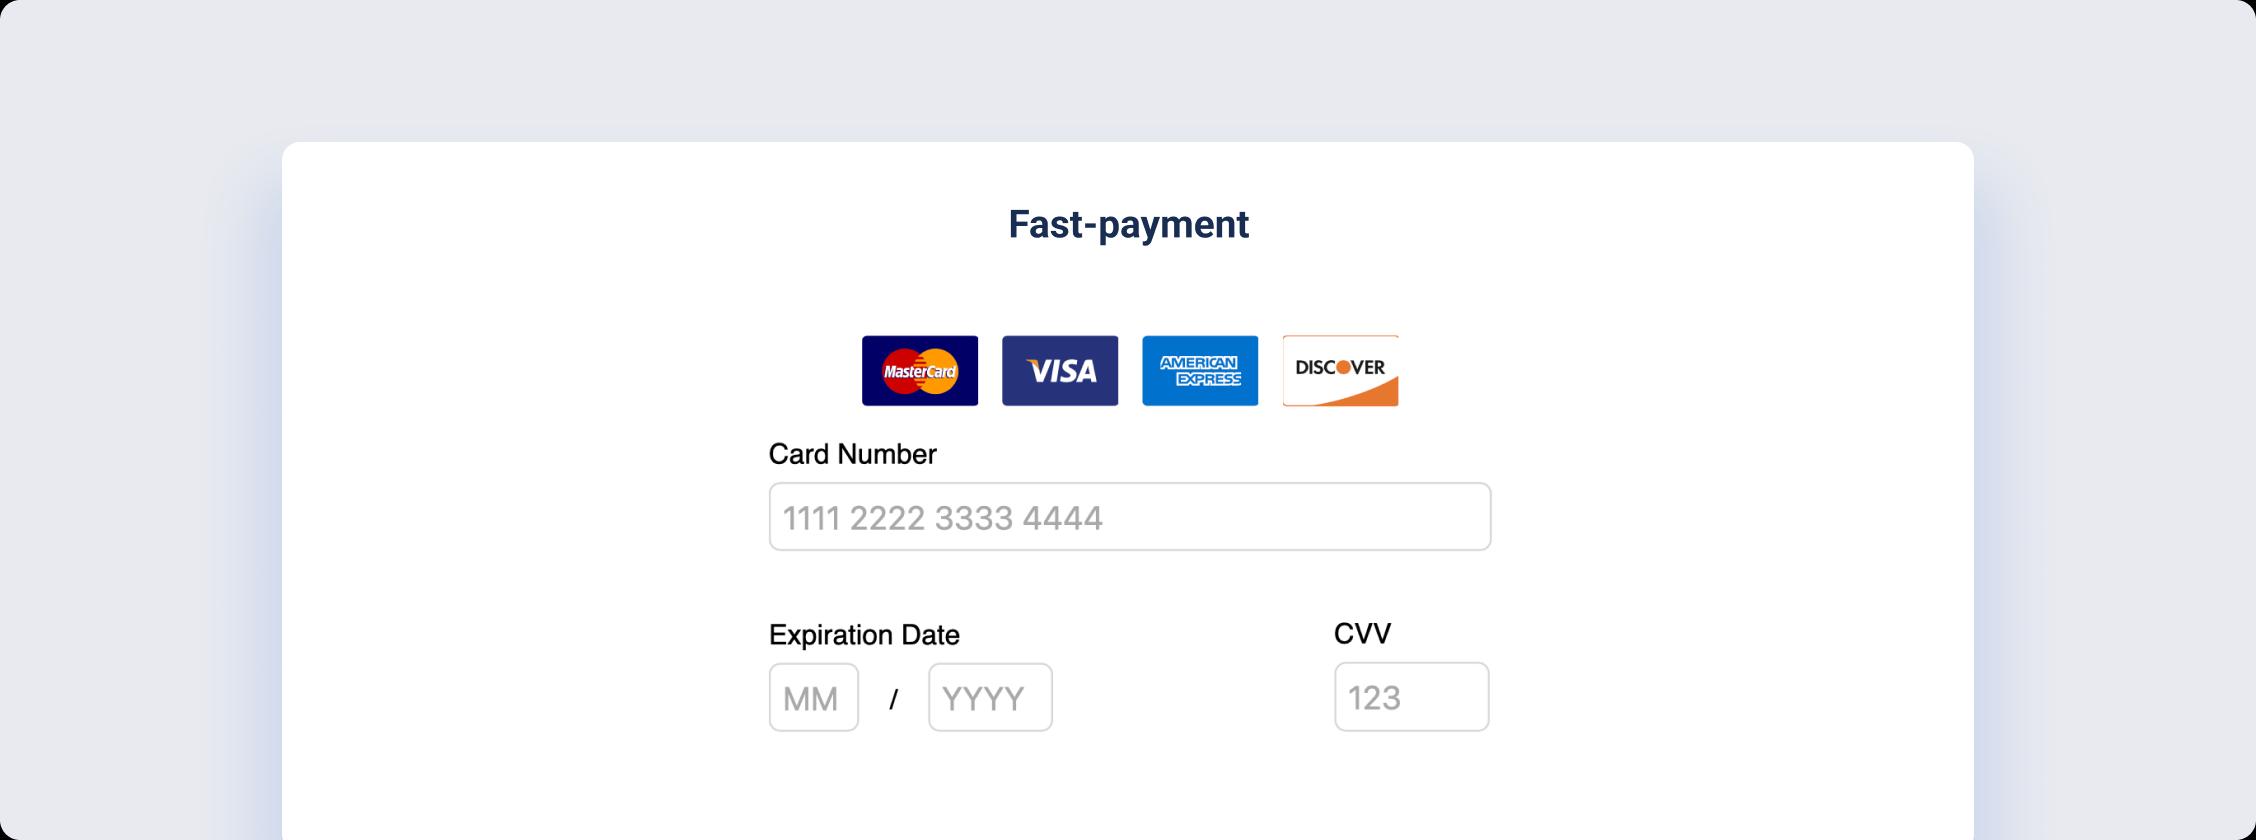 Process credit card transactions directly in the mobile app with the lowest industry fees 